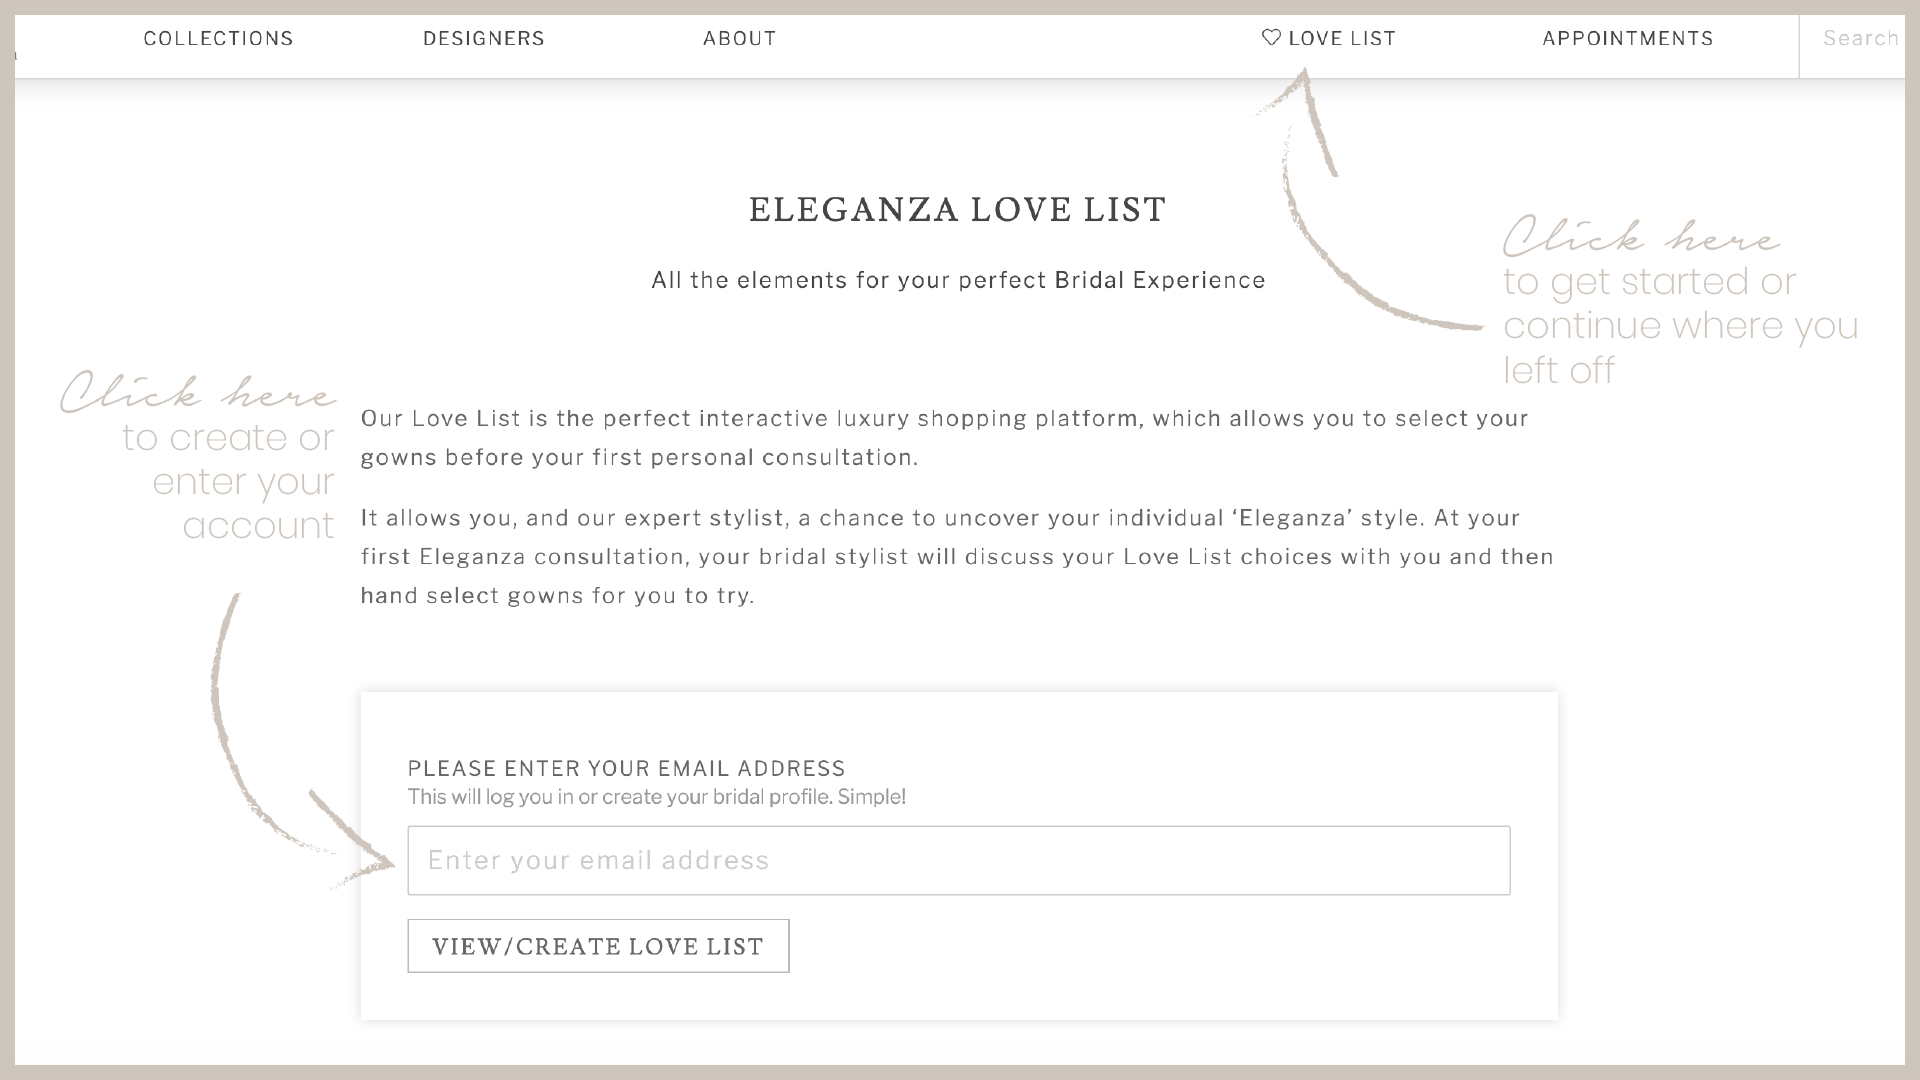 HOW TO: Use the Eleganza Love List Image